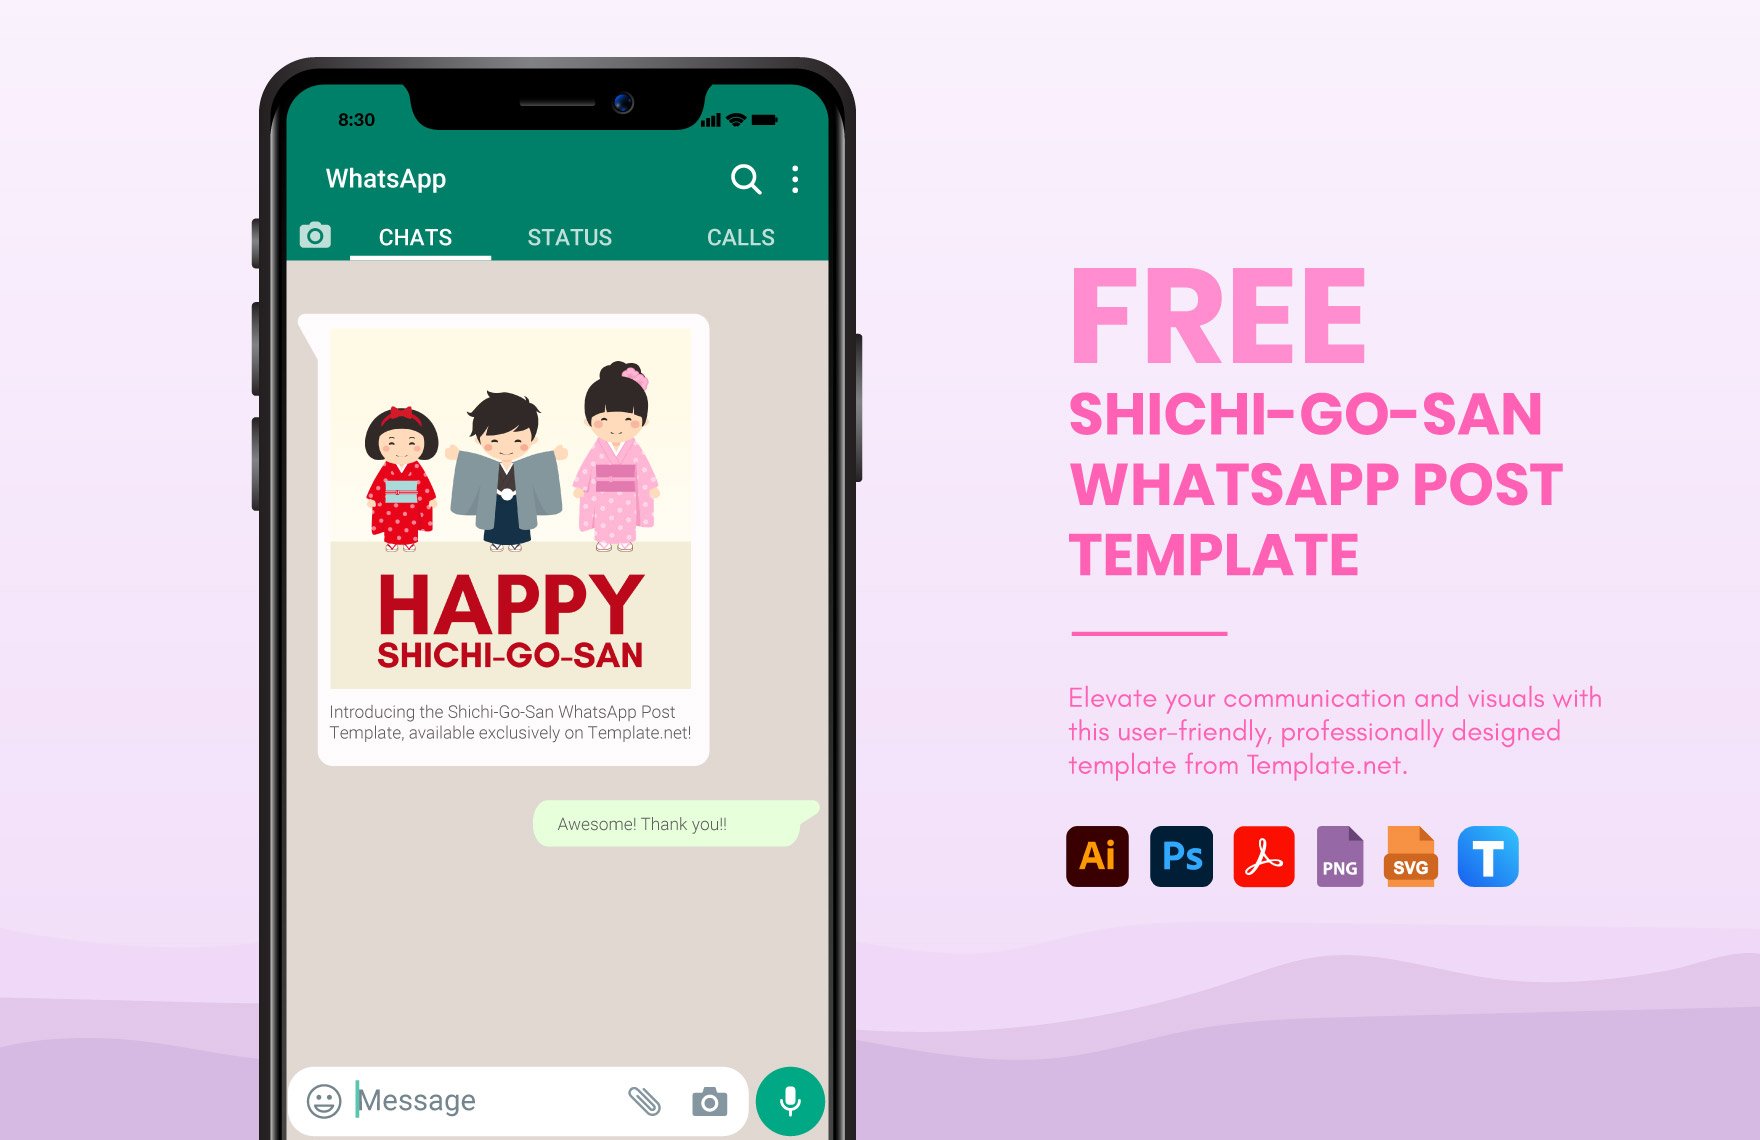 Free Shichi-Go-San WhatsApp Post Template in PDF, Illustrator, PSD, SVG, PNG